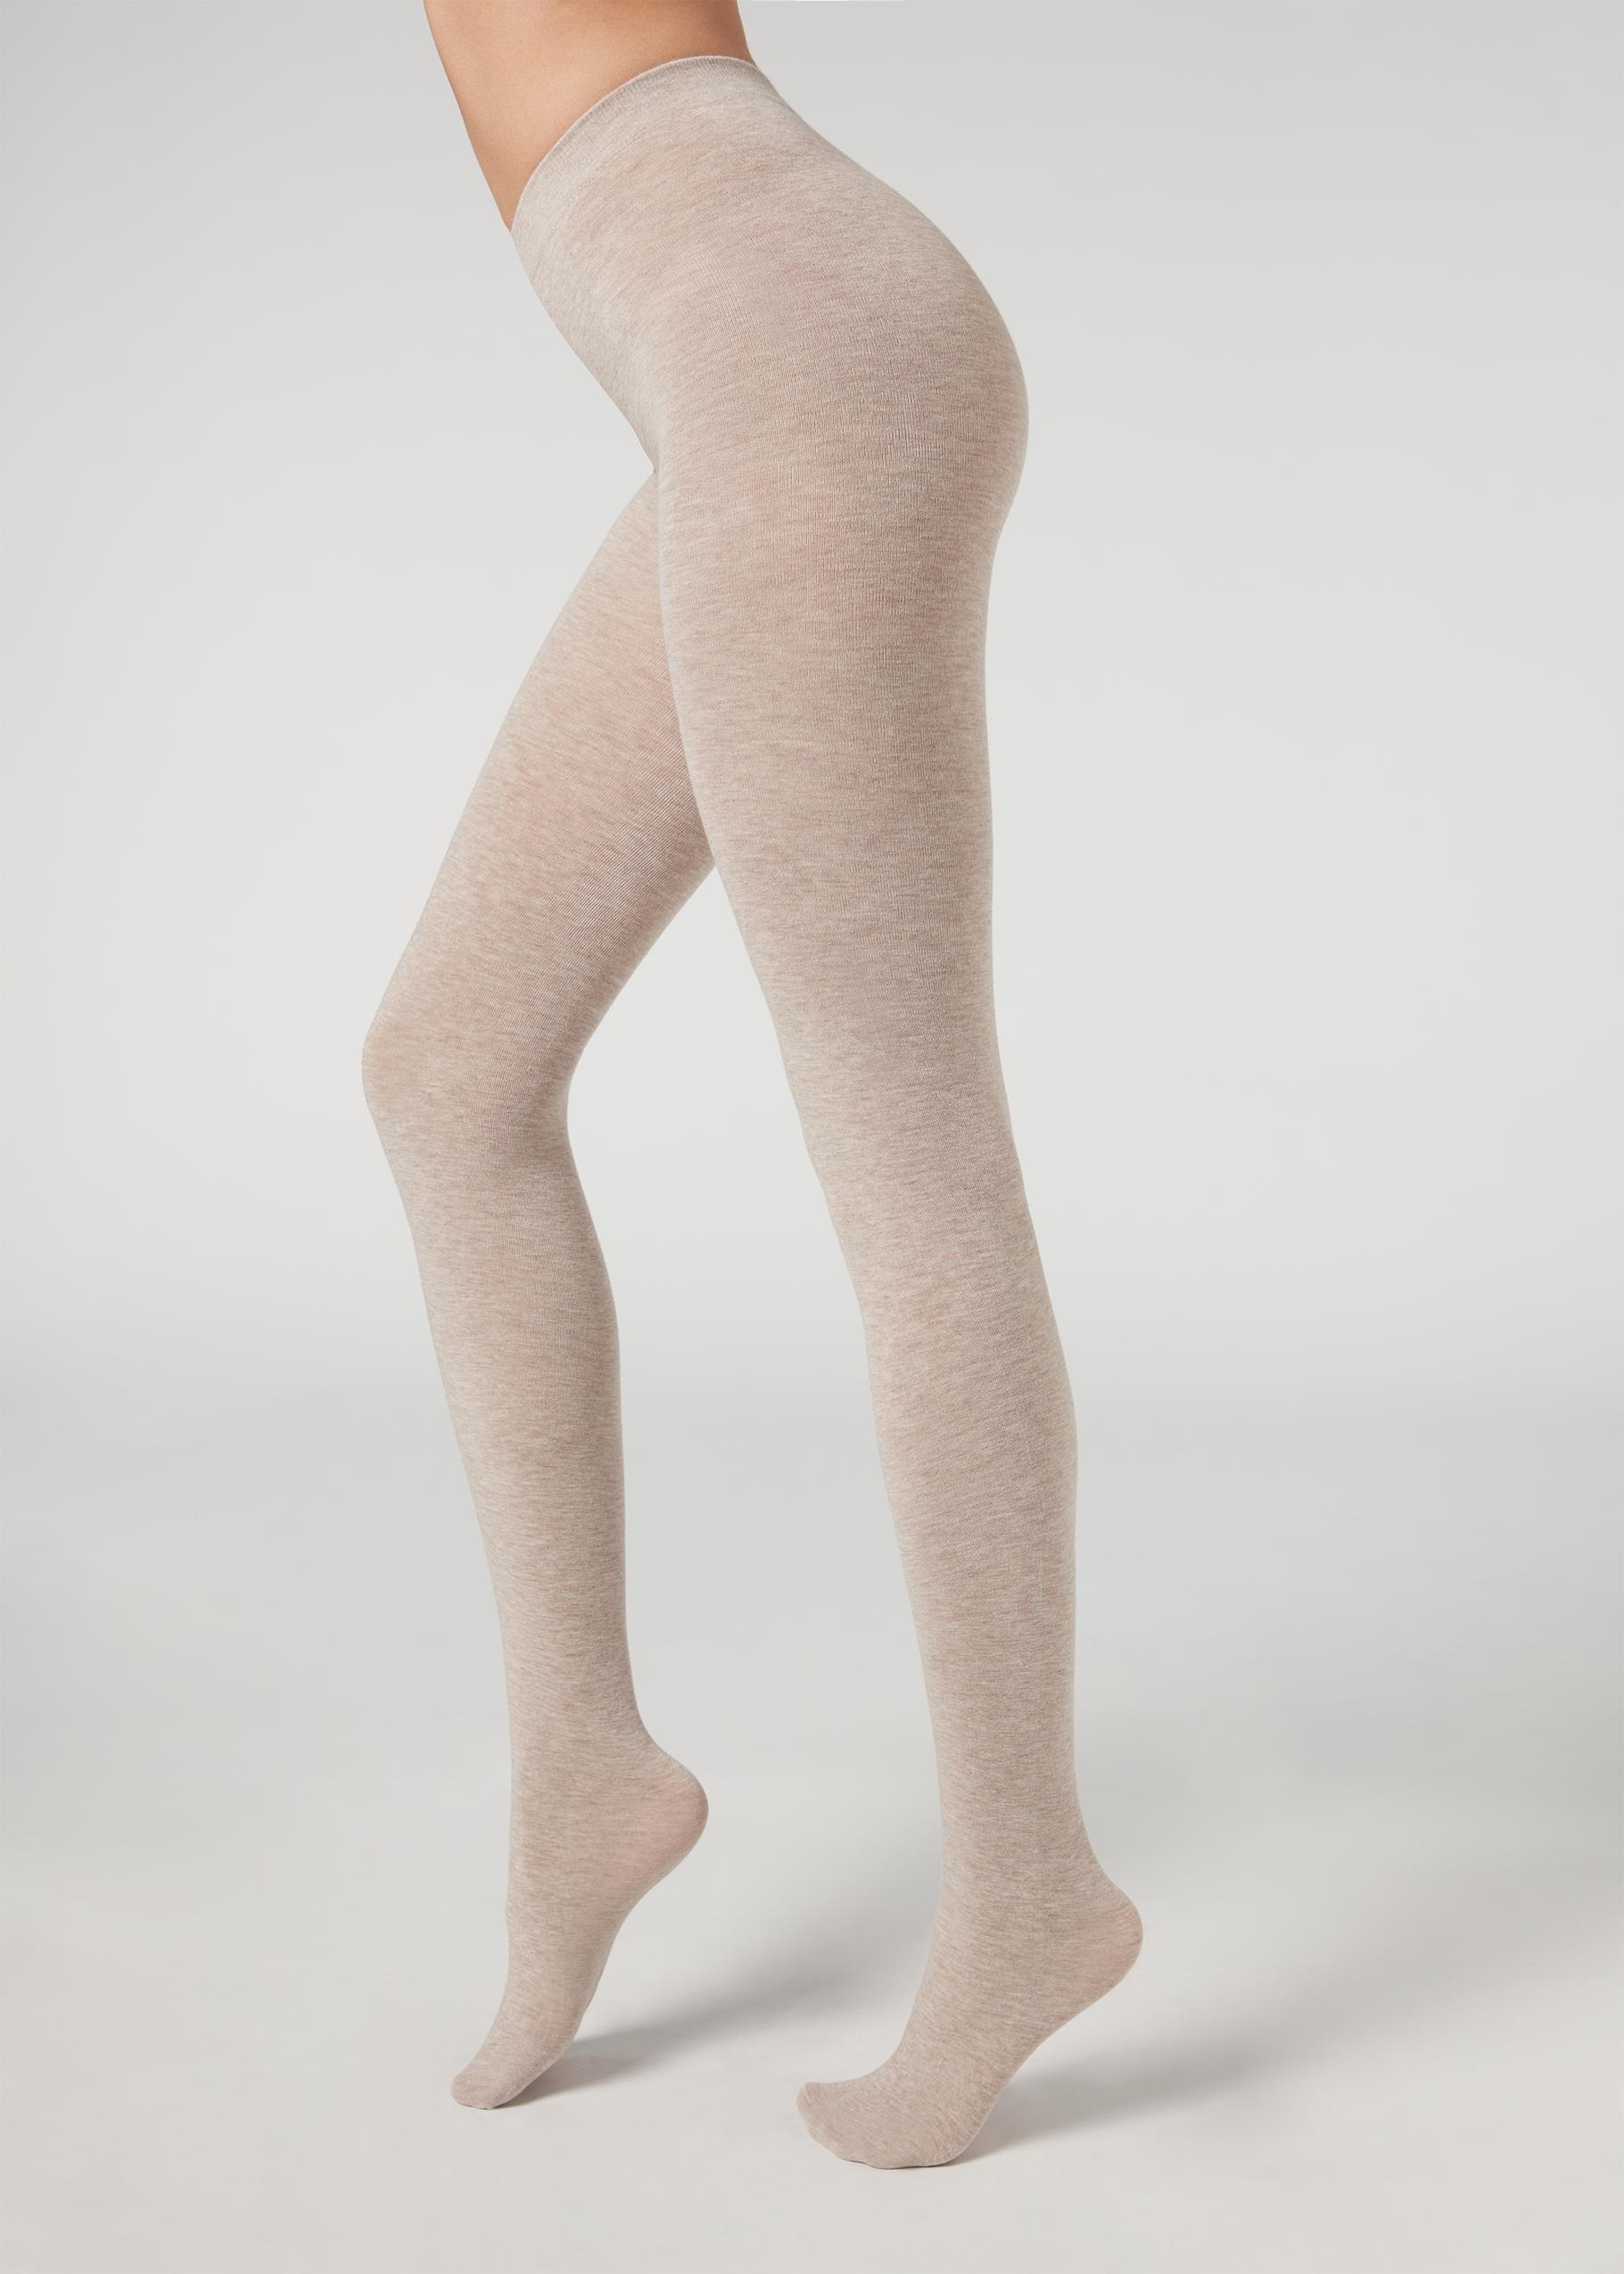 Calzedonia Beige Soft Modal And Cashmere Blend Tights